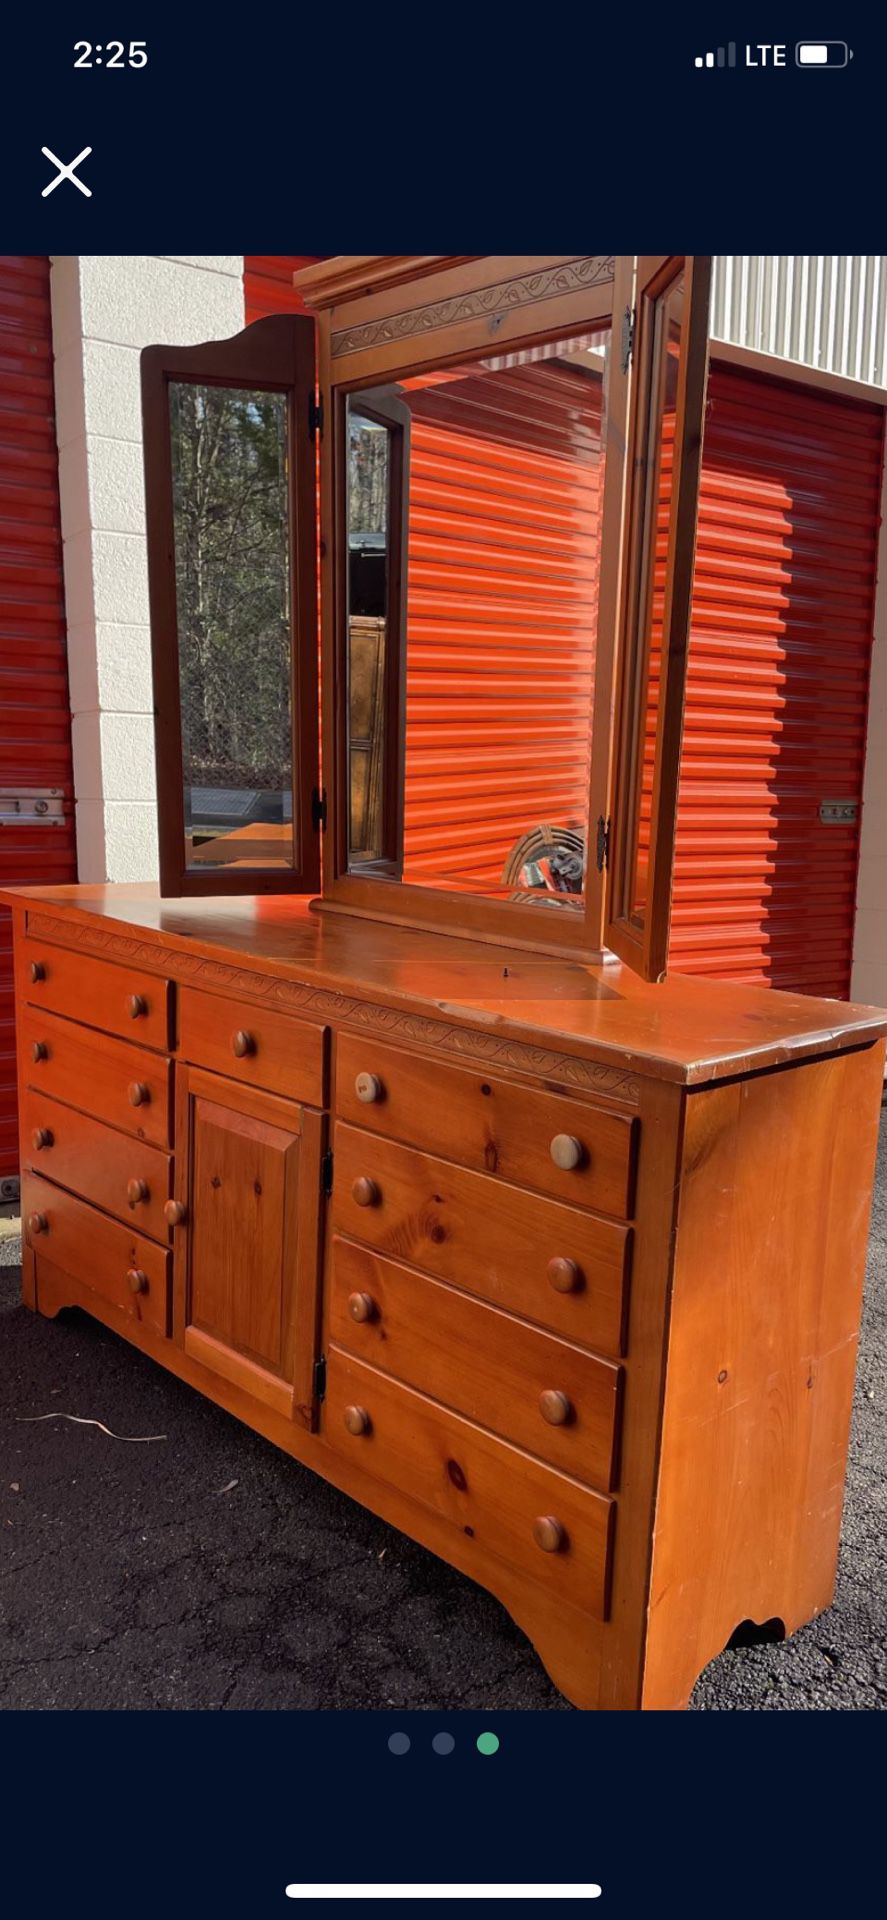 Quality Real Wood Long Dresser, Big Drawers, Big Mirror. Drawers Sliding Smoothly Great Conditipn